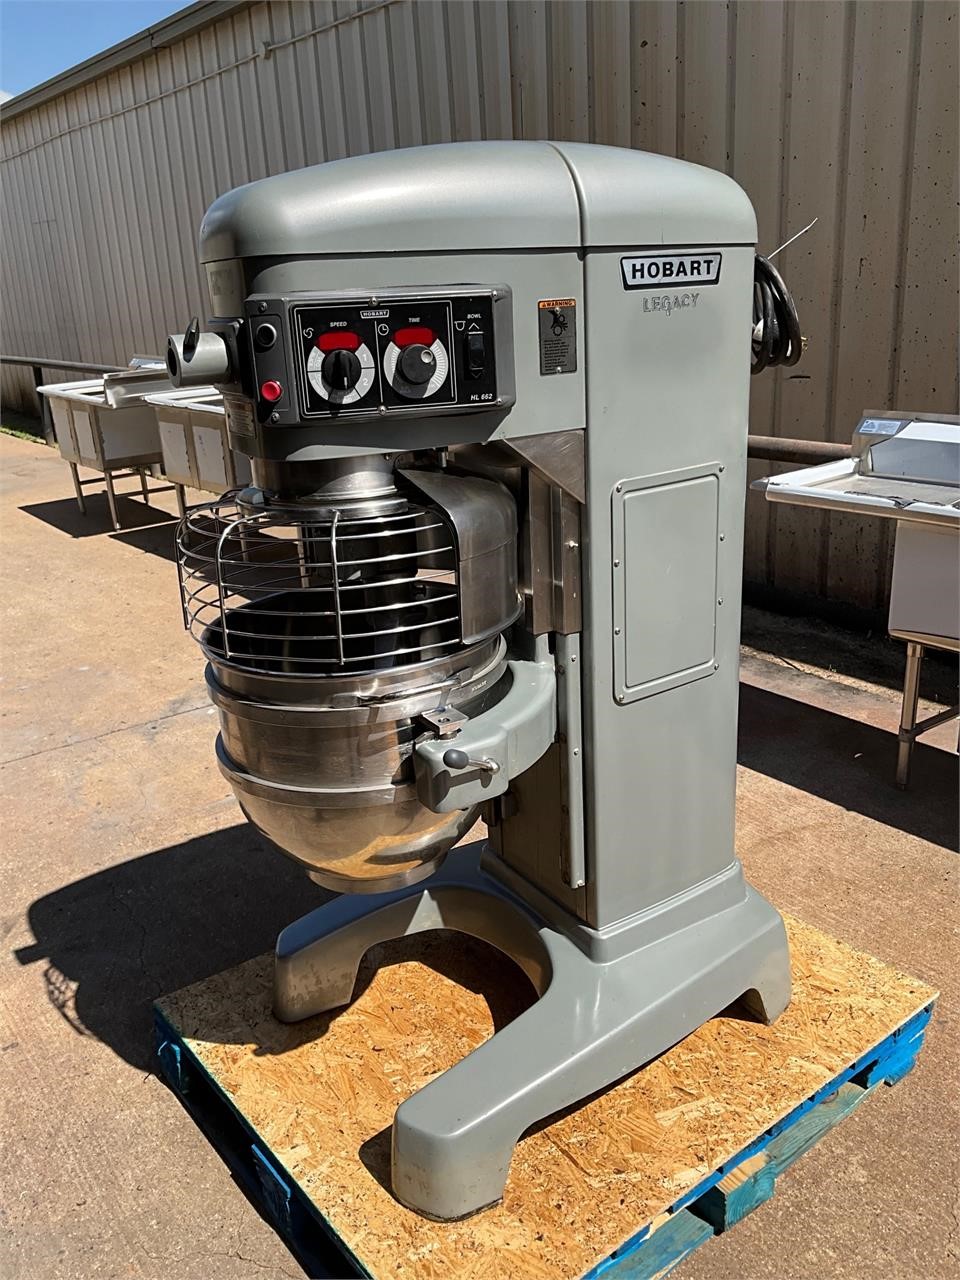 July 10th Restaurant and Bakery Equipment Auction